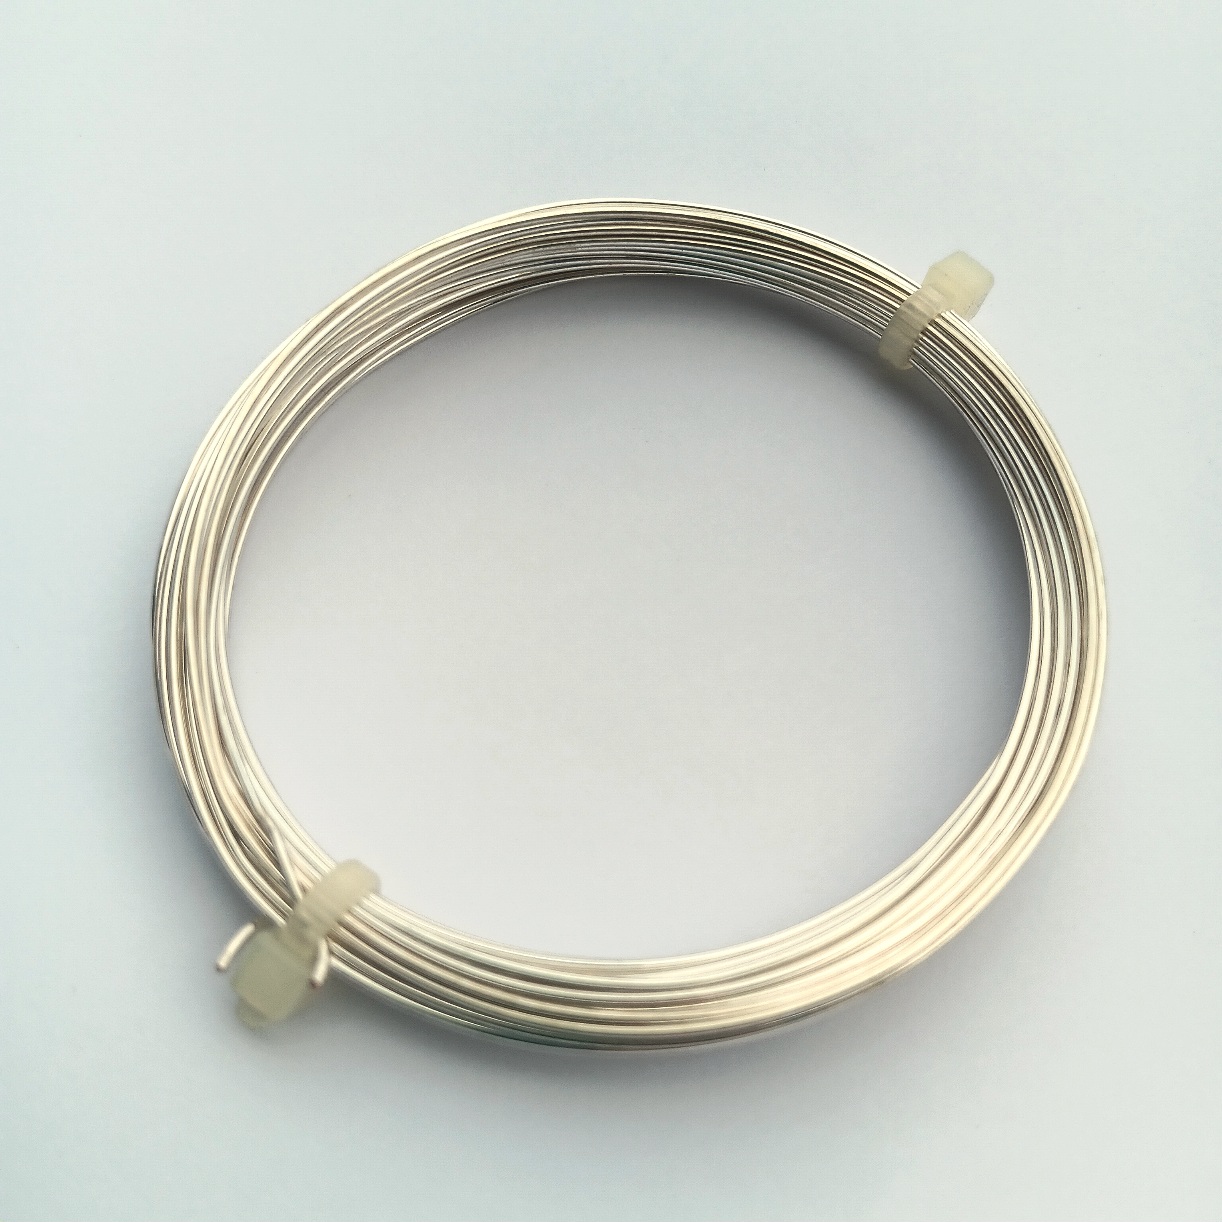 1 PACK of: 5 Metre Coil 0.90mm BARE Silver Plated Copper Wire